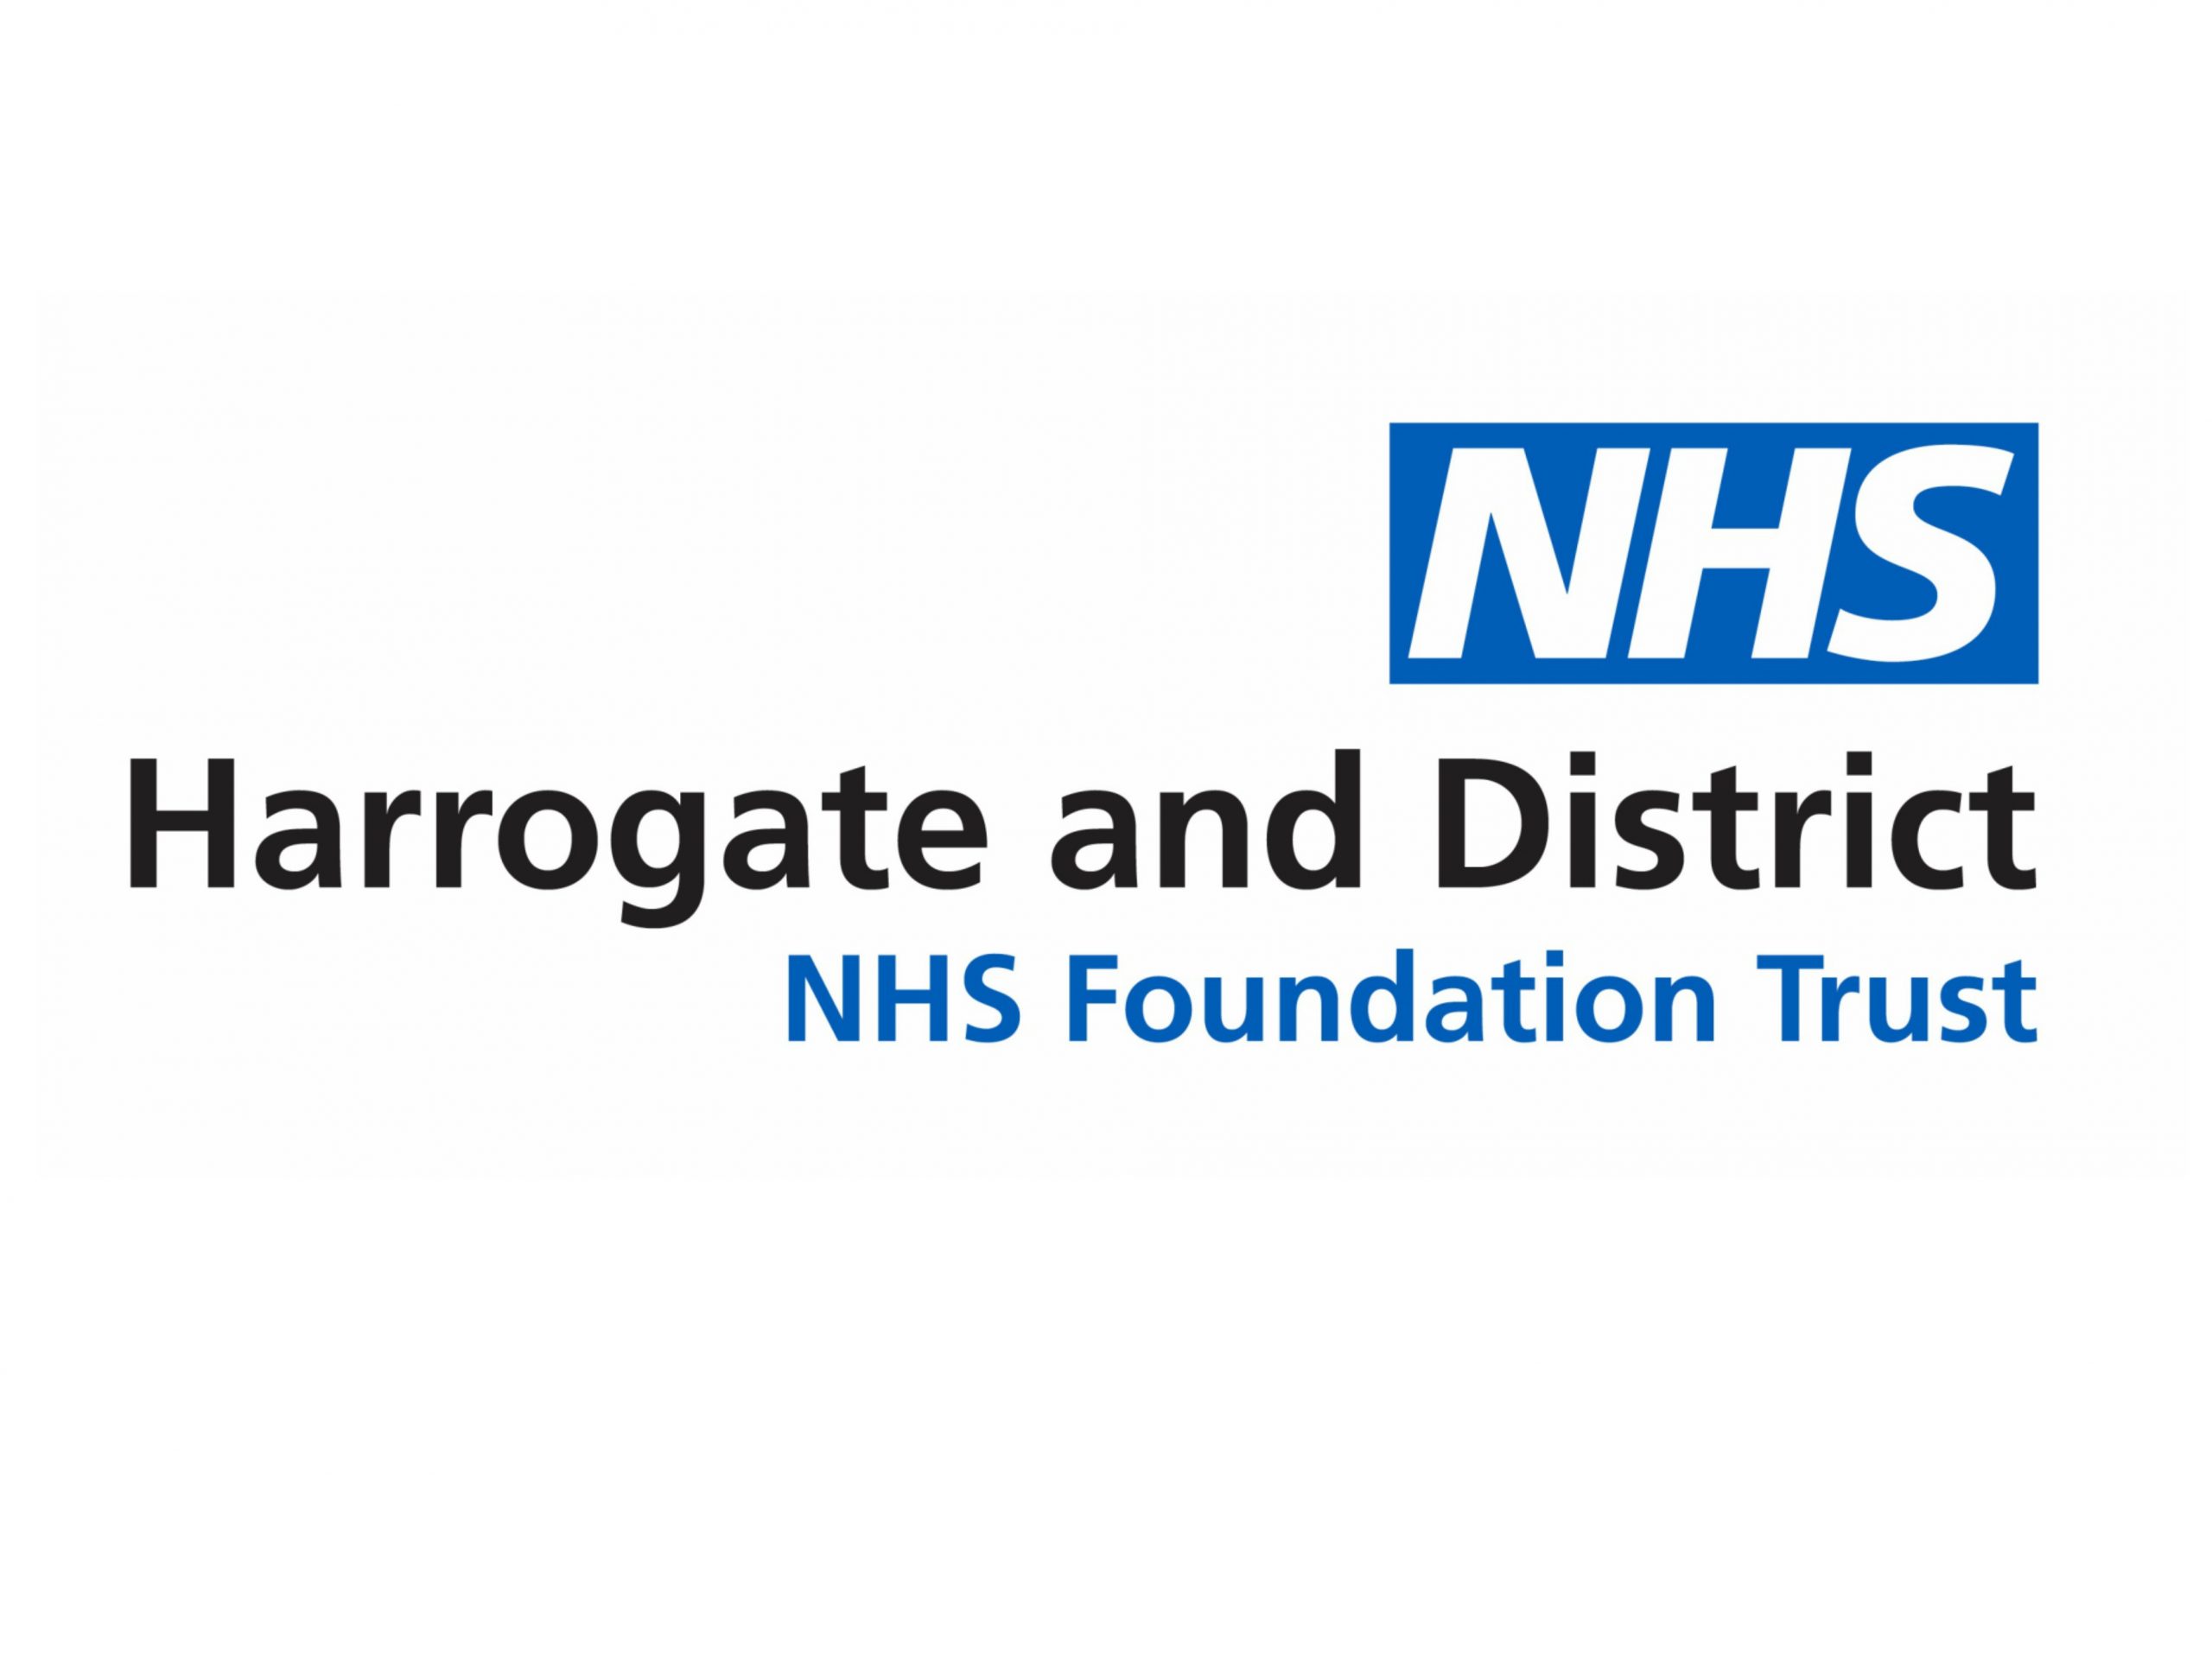 NHS Nightingale Hospital Yorkshire and the Humber to Provide Clinical Imaging Services for Patients in the Region